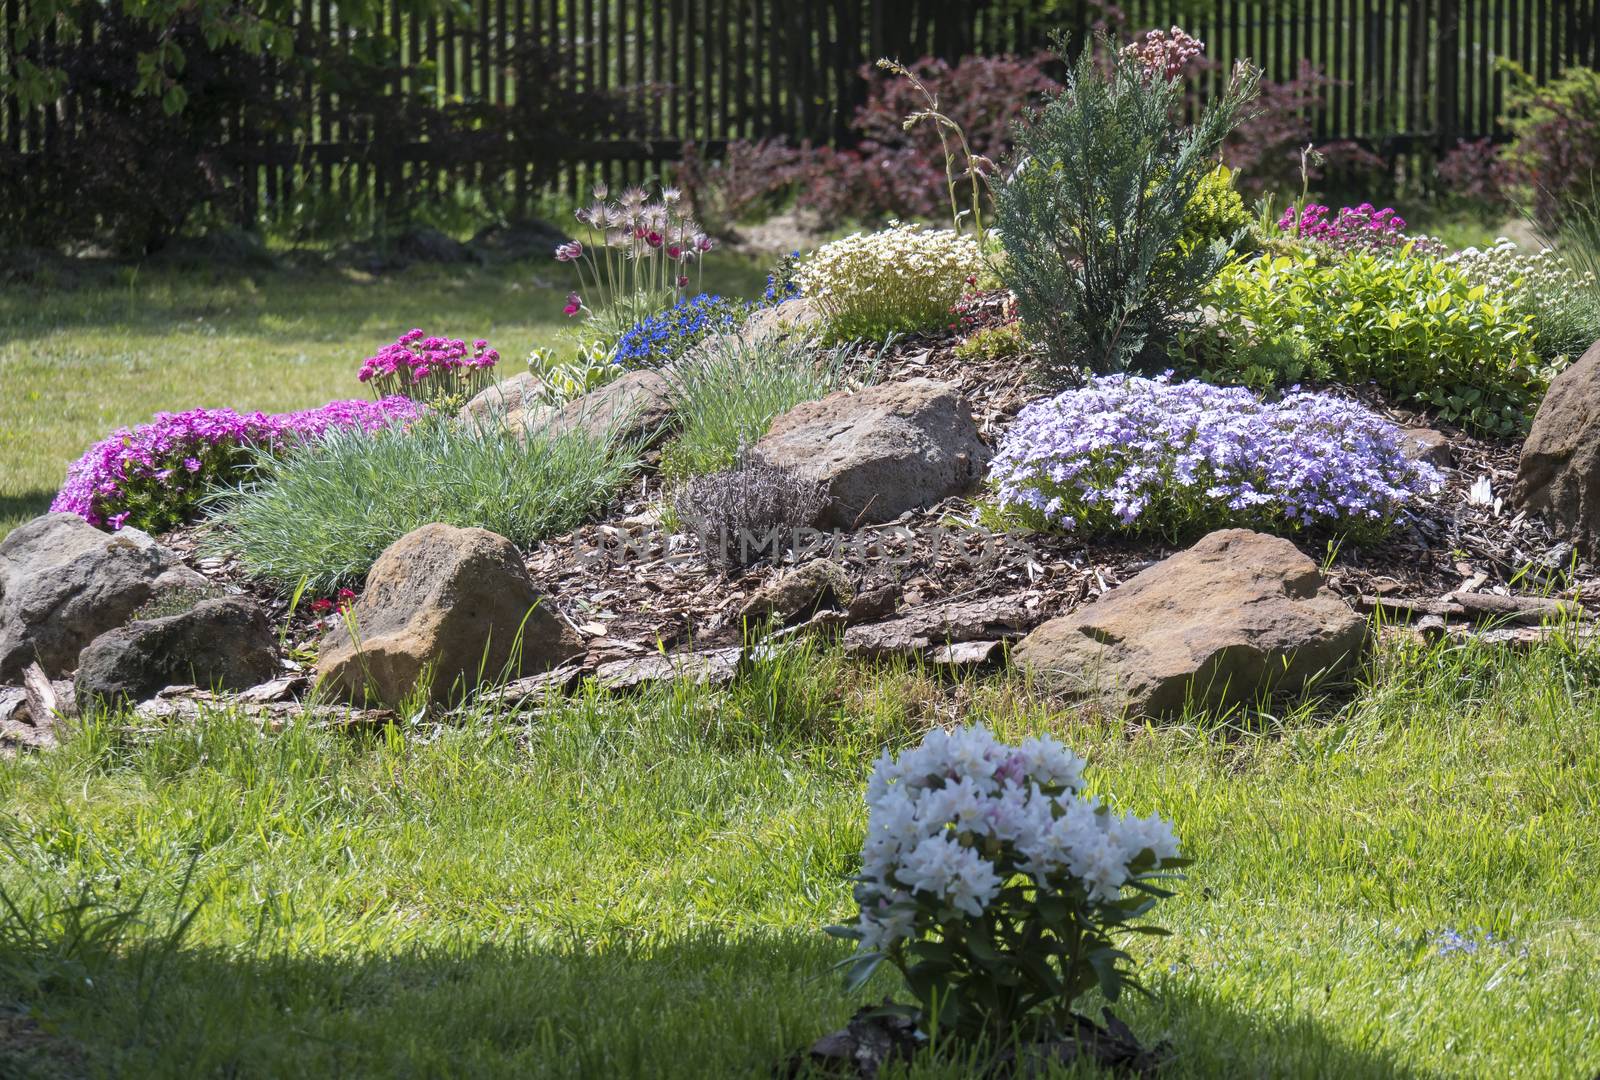 spring garden with beautiful rock garden in full bloom with pink Phlox, Armeria maritima, sea thrift, Bergenia or elephants ears, carnation and other colorful blooming flowers.